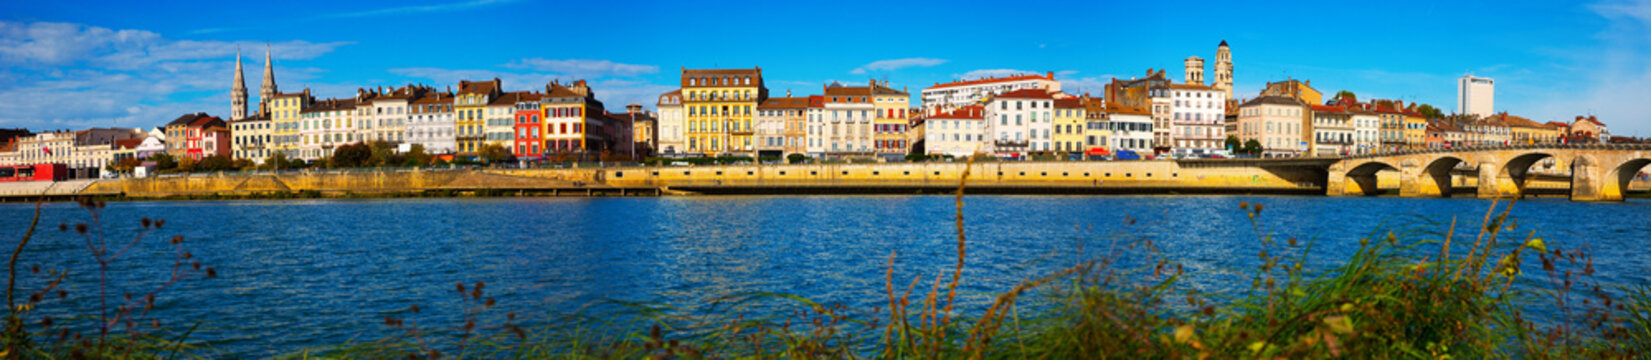 Panorama of Macon with Saone river, France